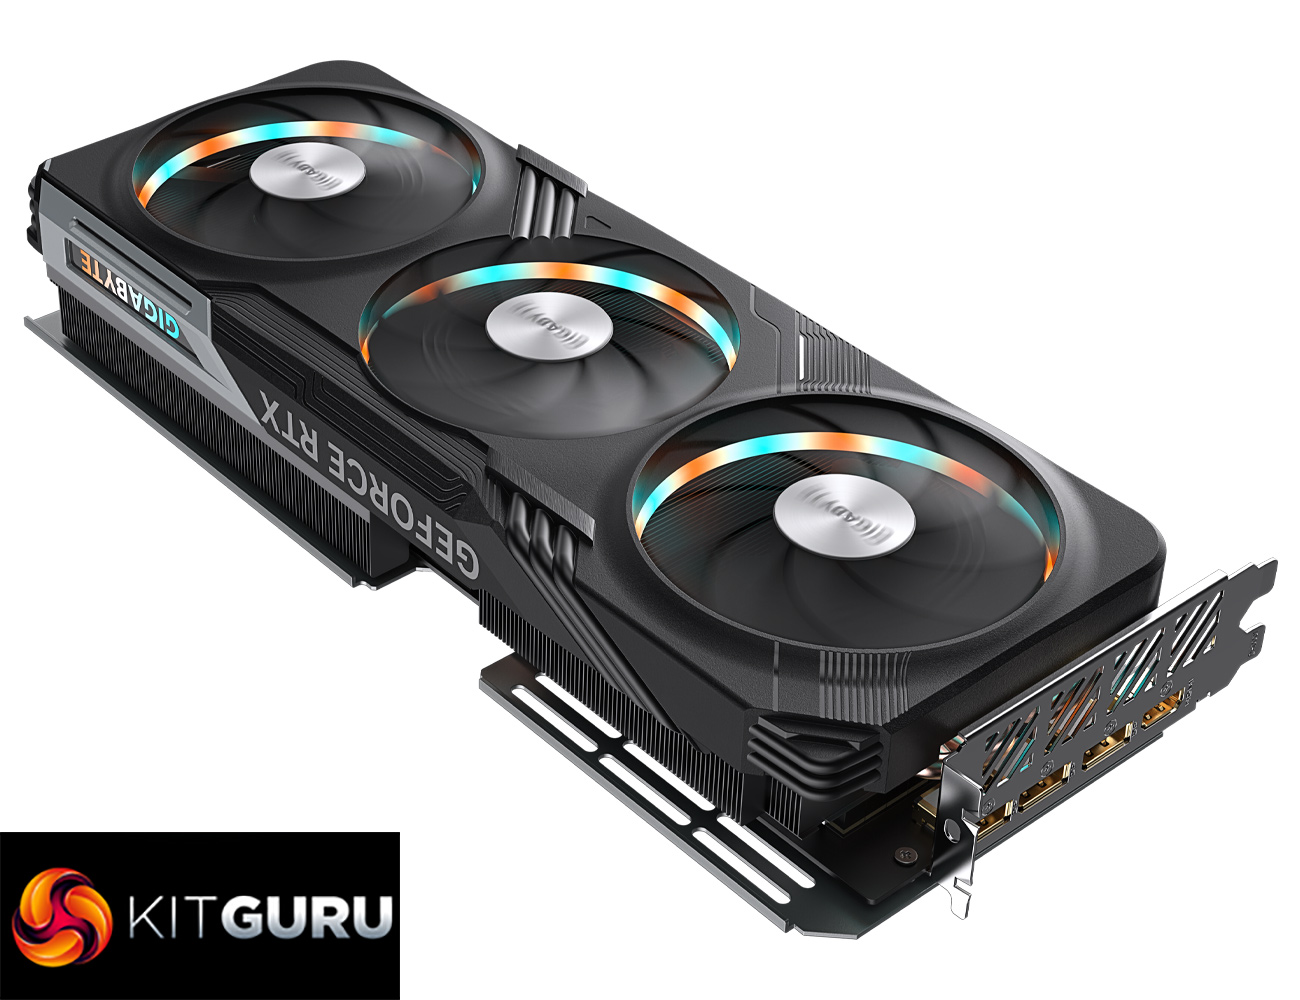 Review : NVIDIA RTX 4070 Founders Edition - Ray tracing and DLSS